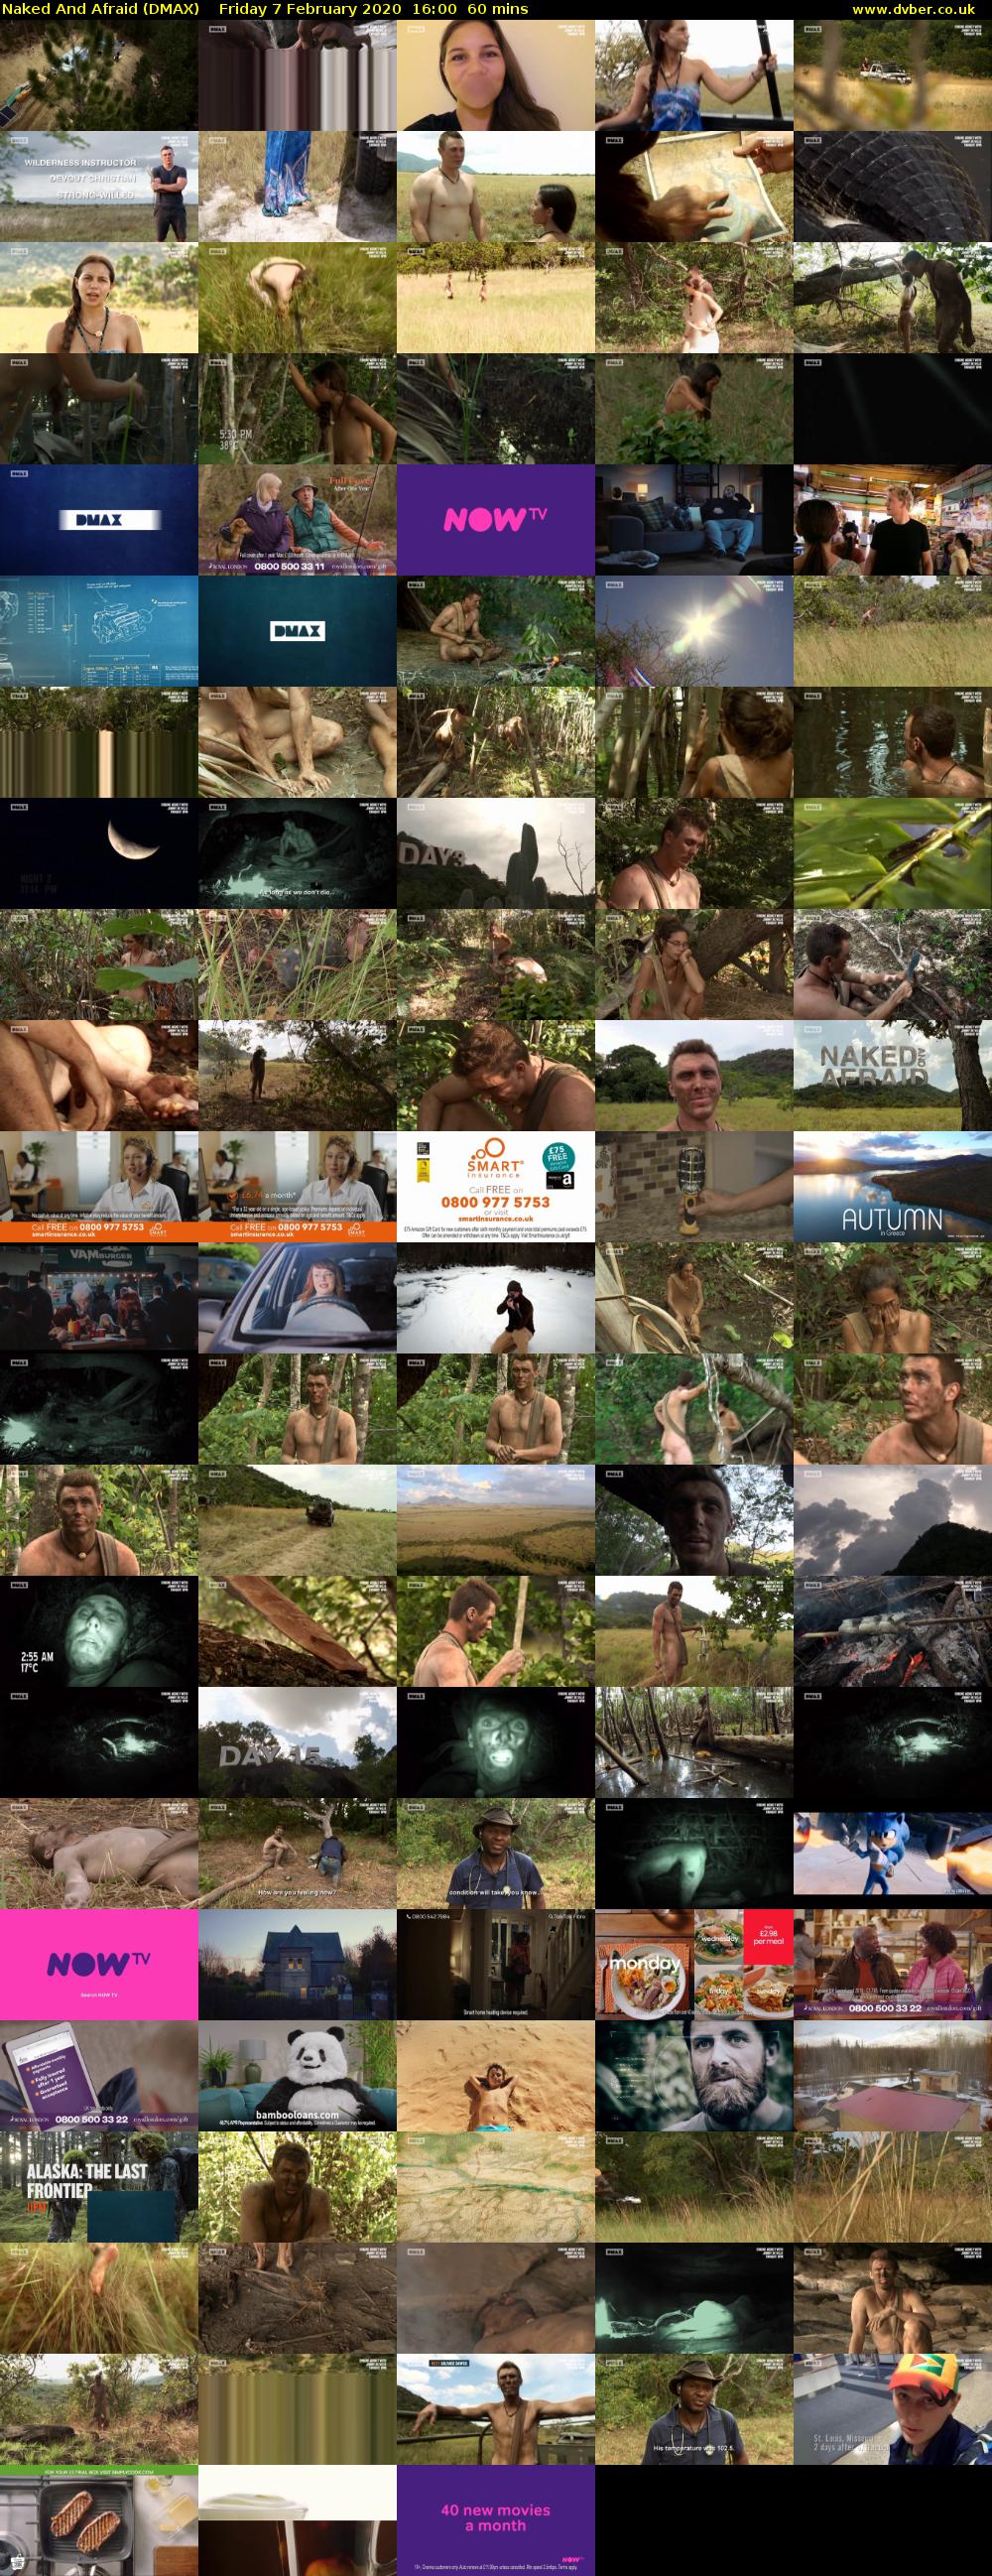 Naked And Afraid (DMAX) Friday 7 February 2020 16:00 - 17:00